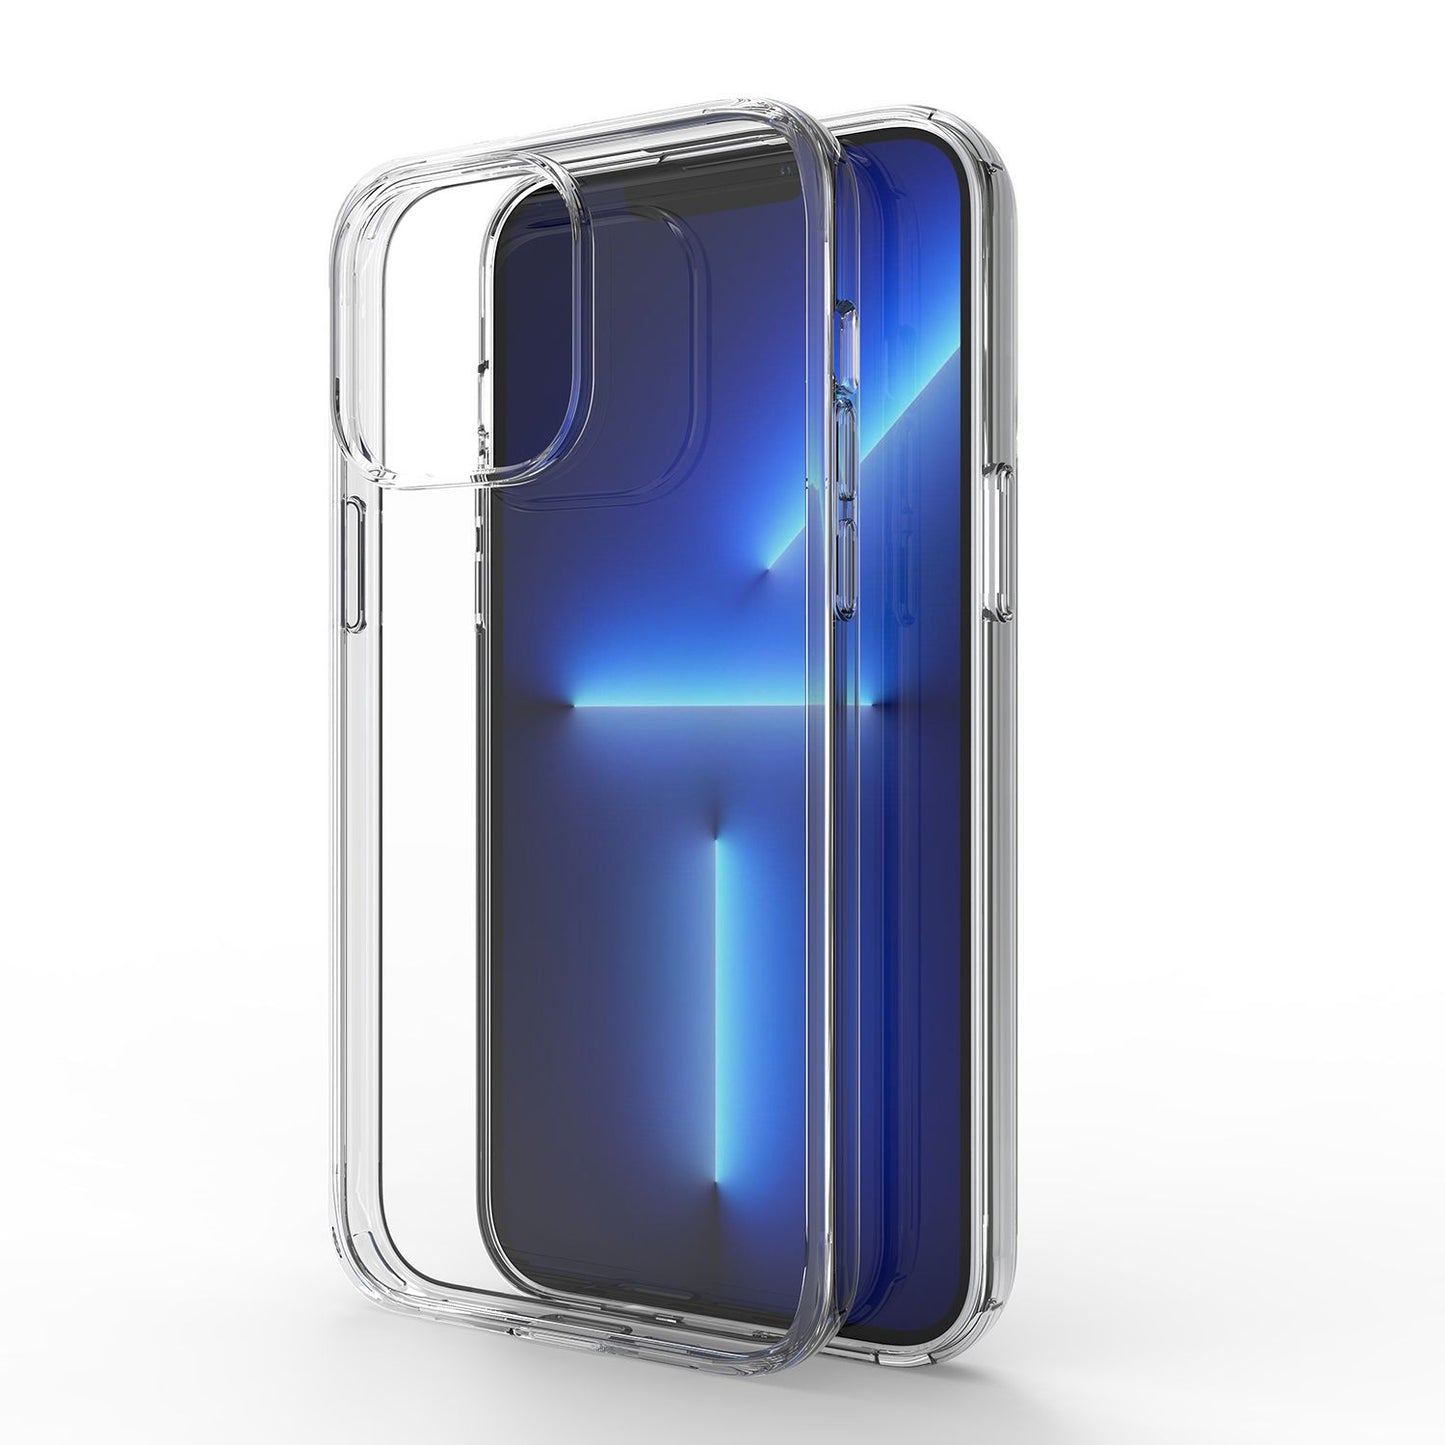 hot sale shockproof case armor transparent case clear tpu phone case cover for iphone 11 pro